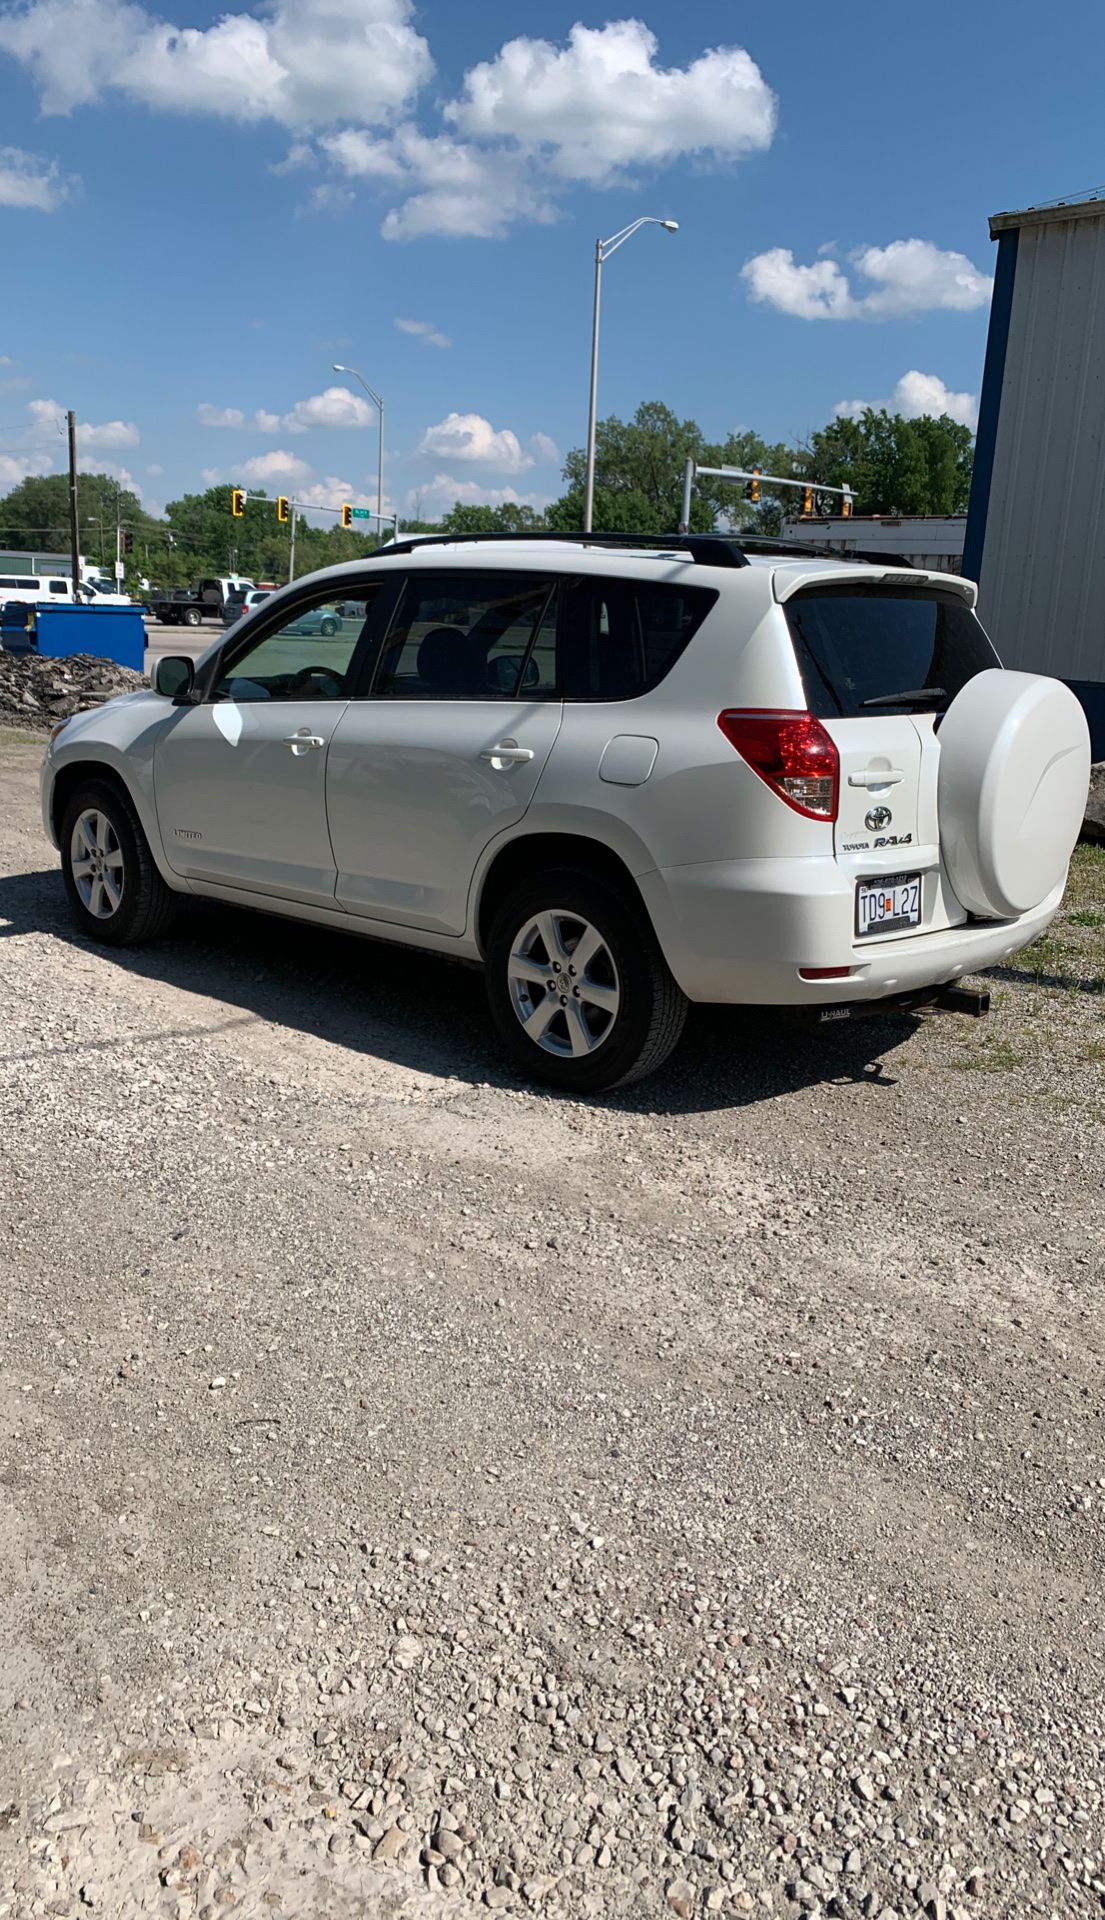 2008 Toyota rav 4 limited v6 one owner new tires repairs all thru dealer runs drives great no issues